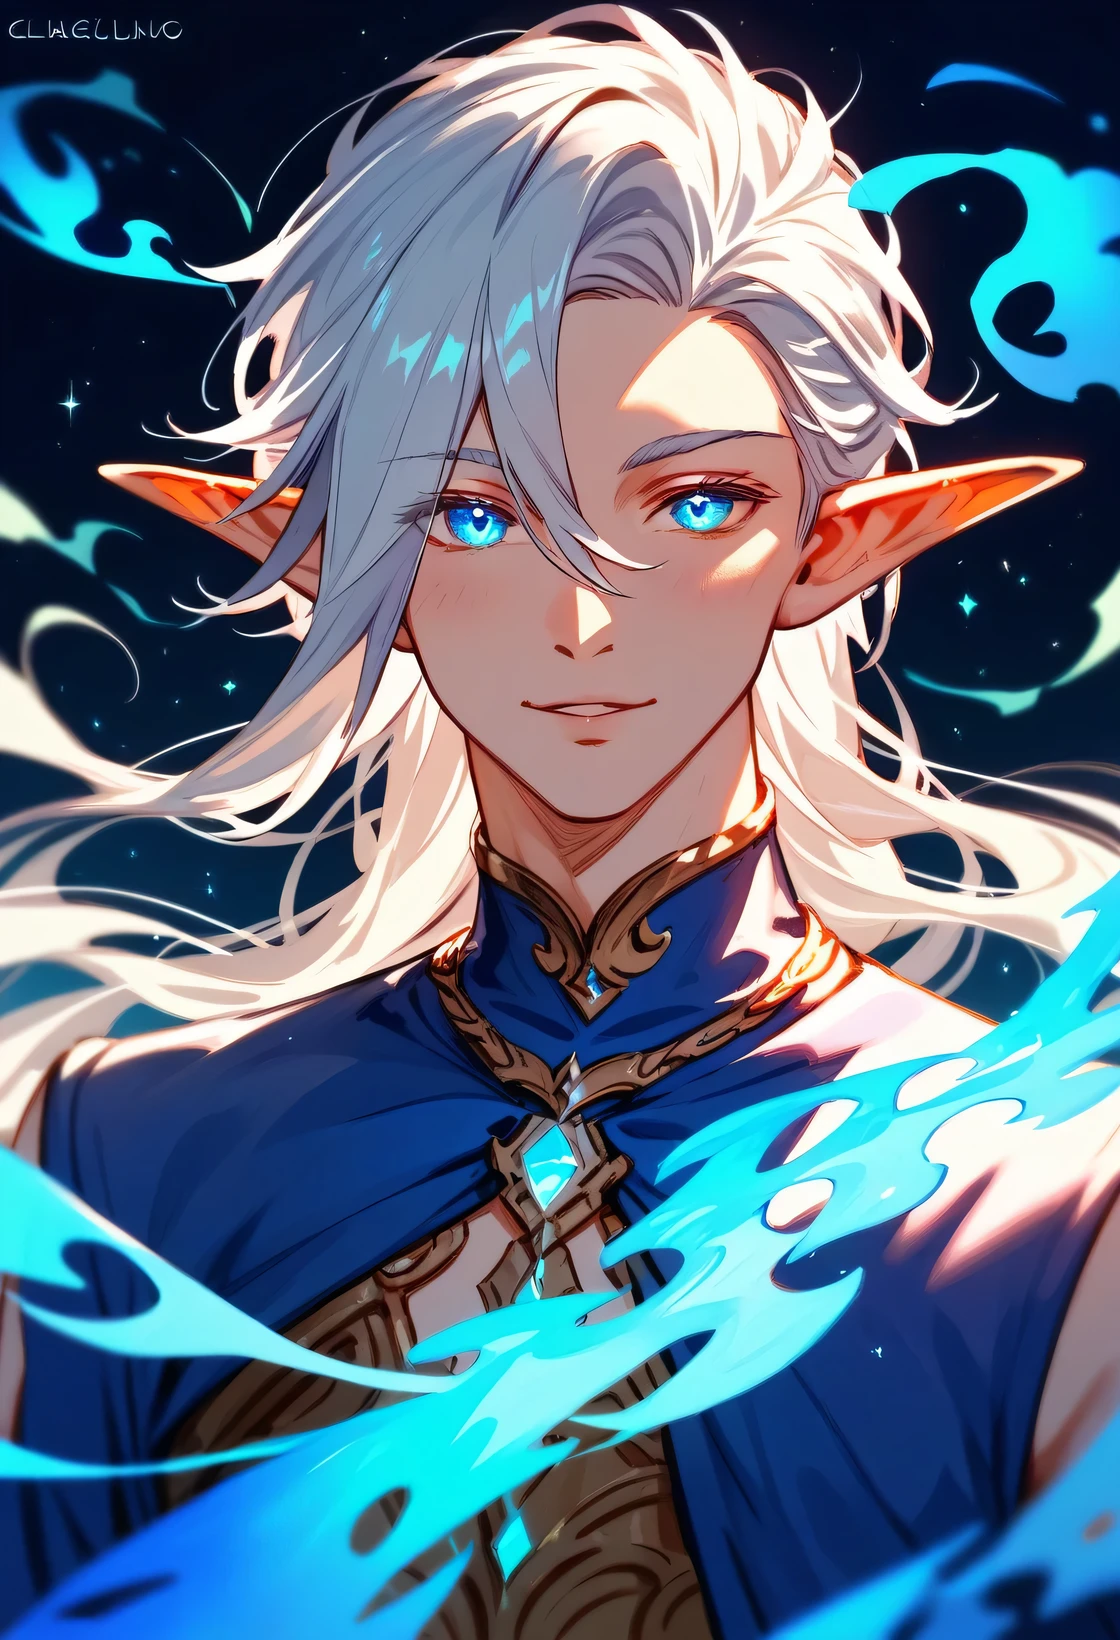 (score_9,score_8_up,score_7_up,score_6_up,score_5_up,score_4_up) male elf with graceful elegance, glowing, whimsical, enchanted, magical, fantasy art concept, intricate details, 